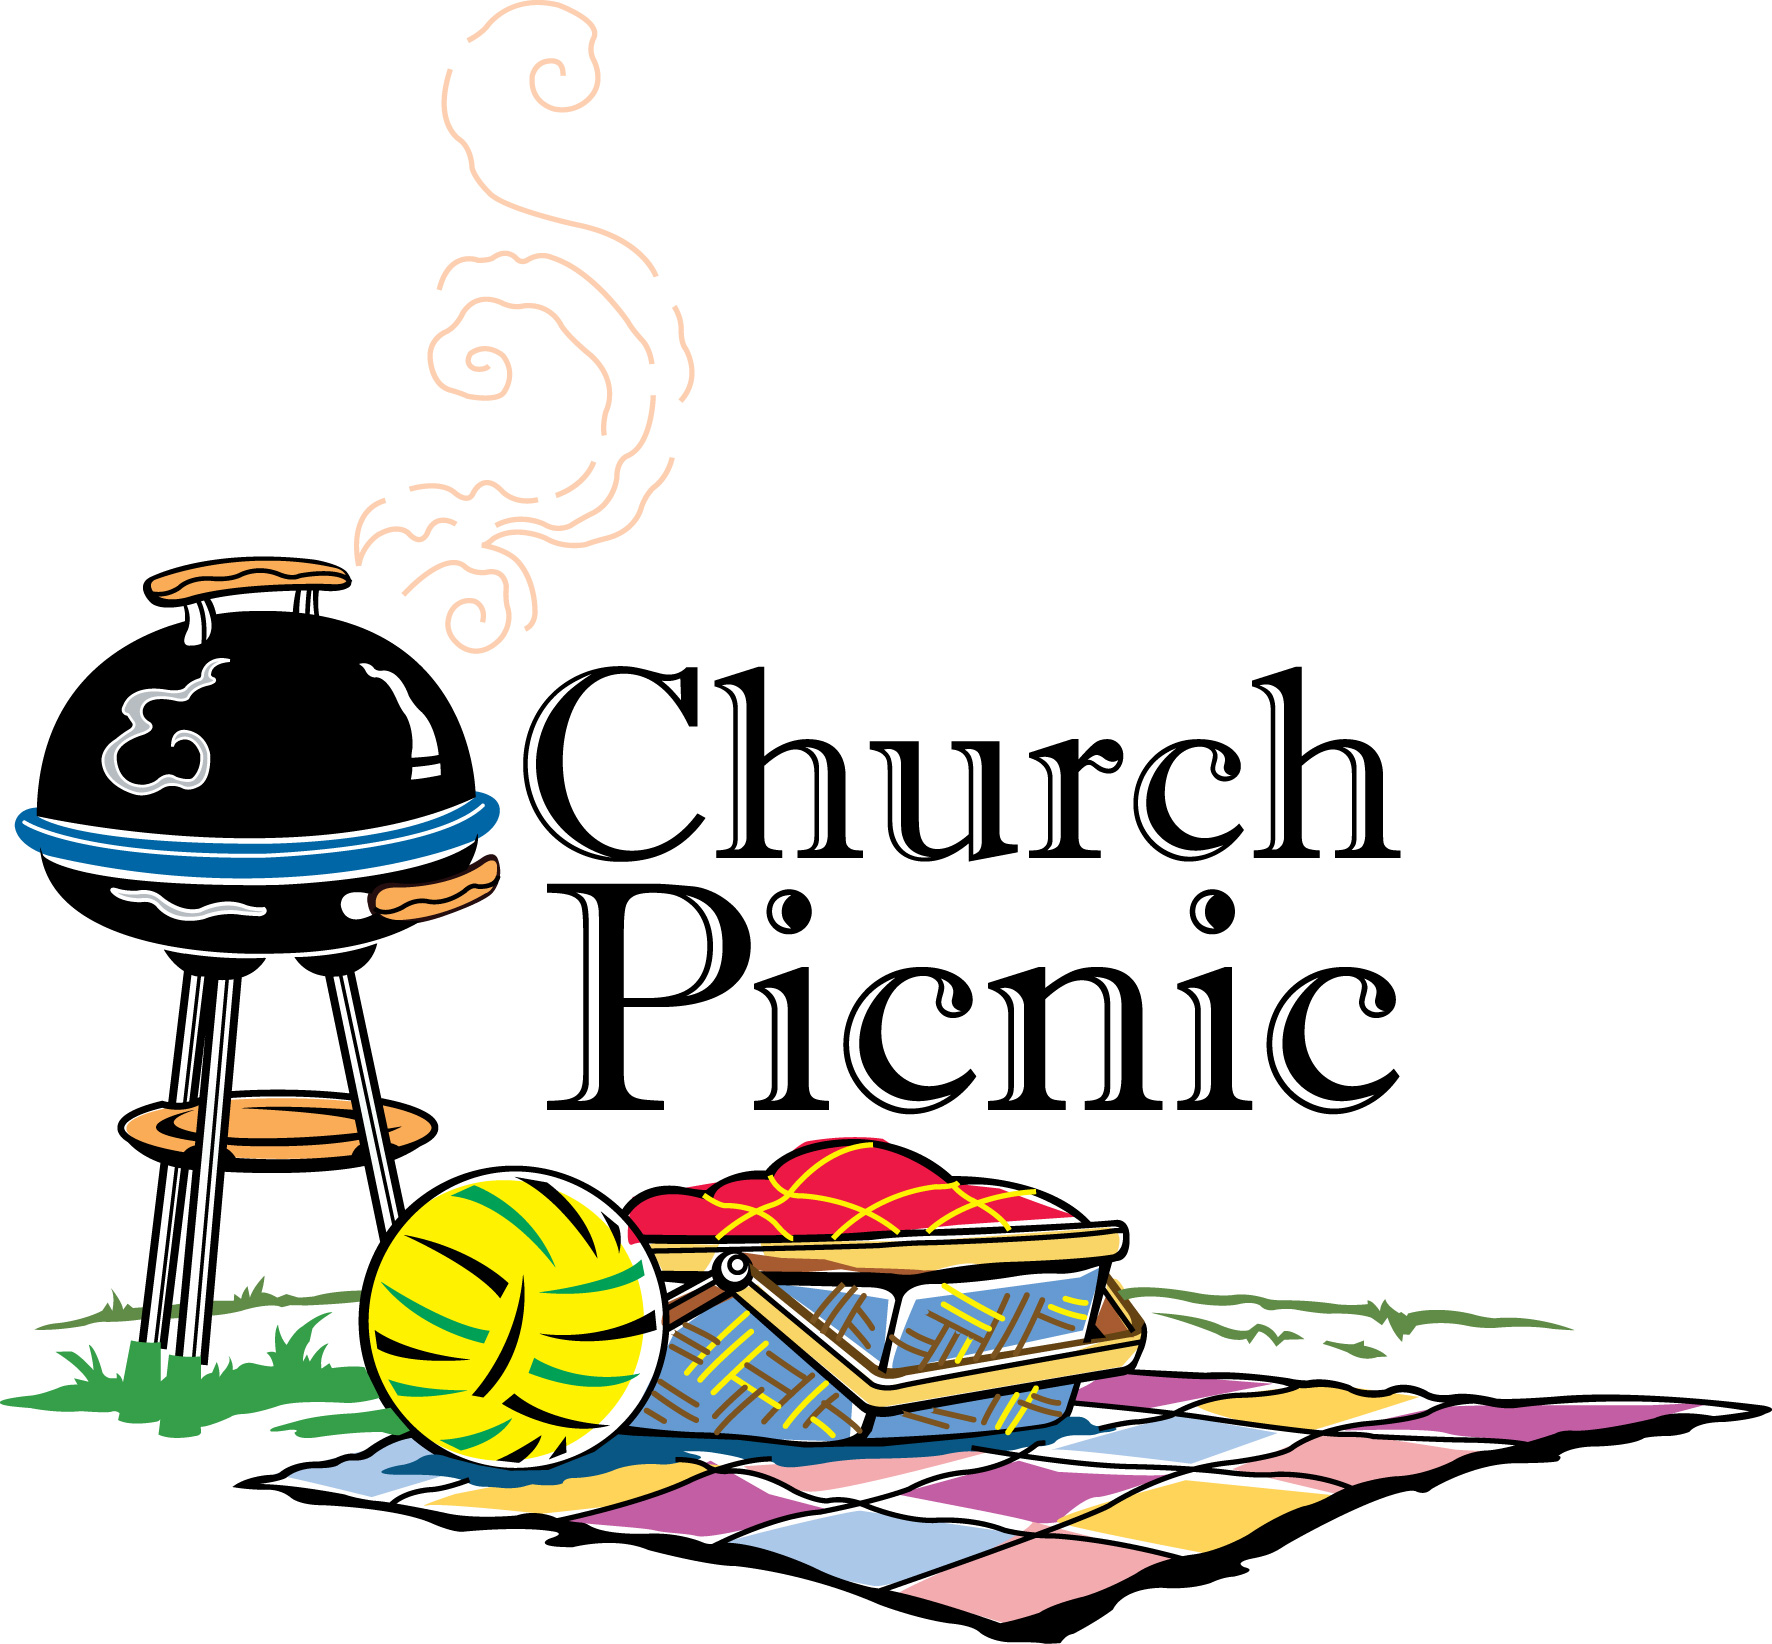 Church Picnic Flyer Clipart library - Free Clipart Images.